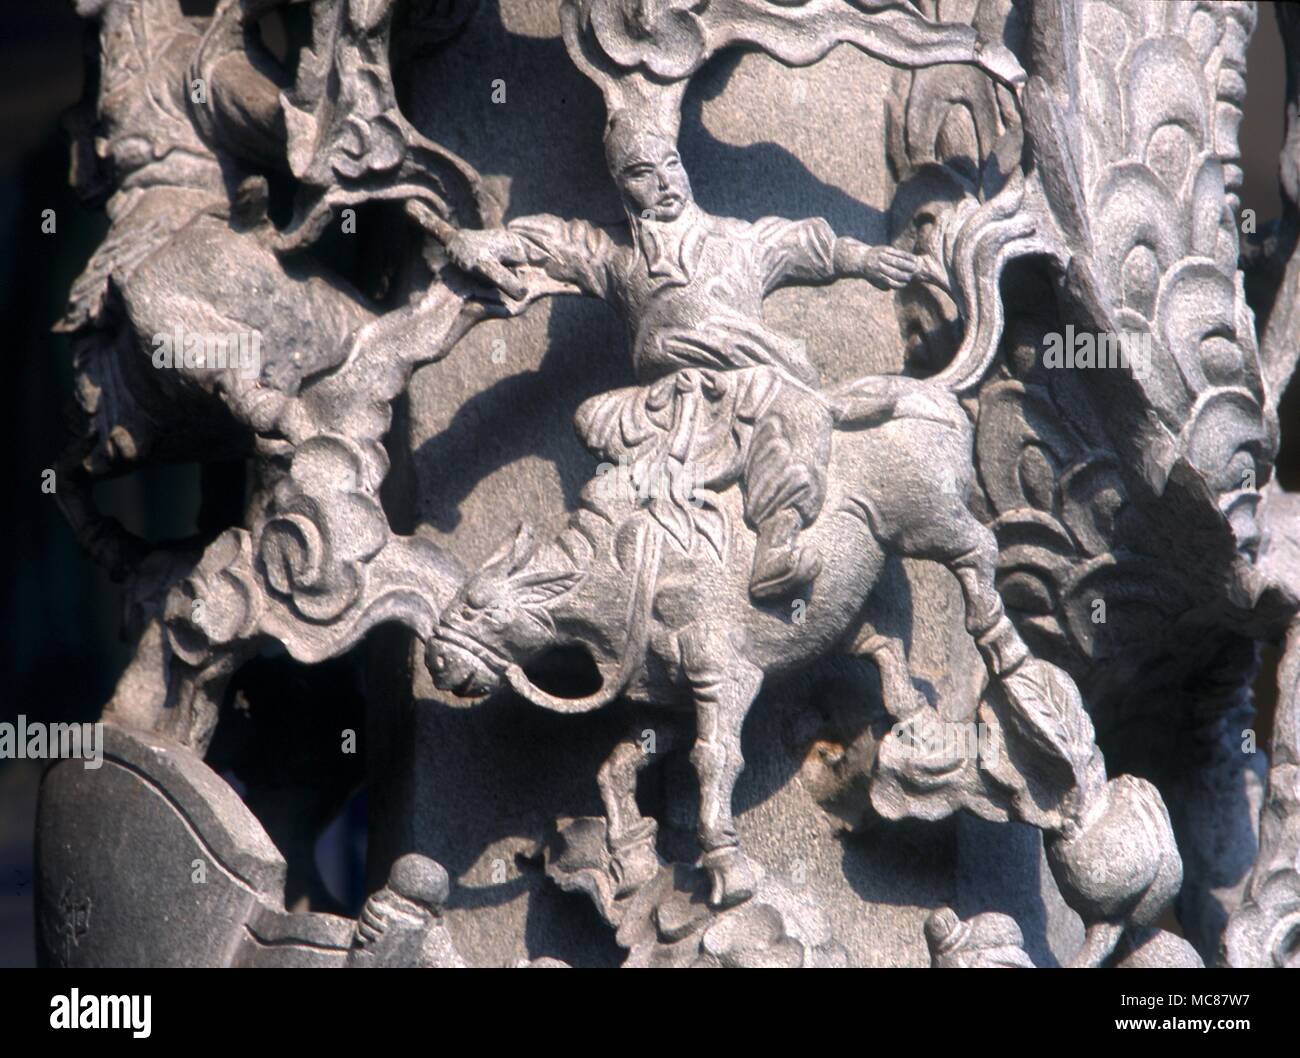 Chinese Mythology Eight immortals One of the Eight Immortals (Pa Hsien) from a column supporting a roof over a n external altar in a Chinese Temple in Penang Malaysia Each one of the eight Immortals is carved into the column Stock Photo